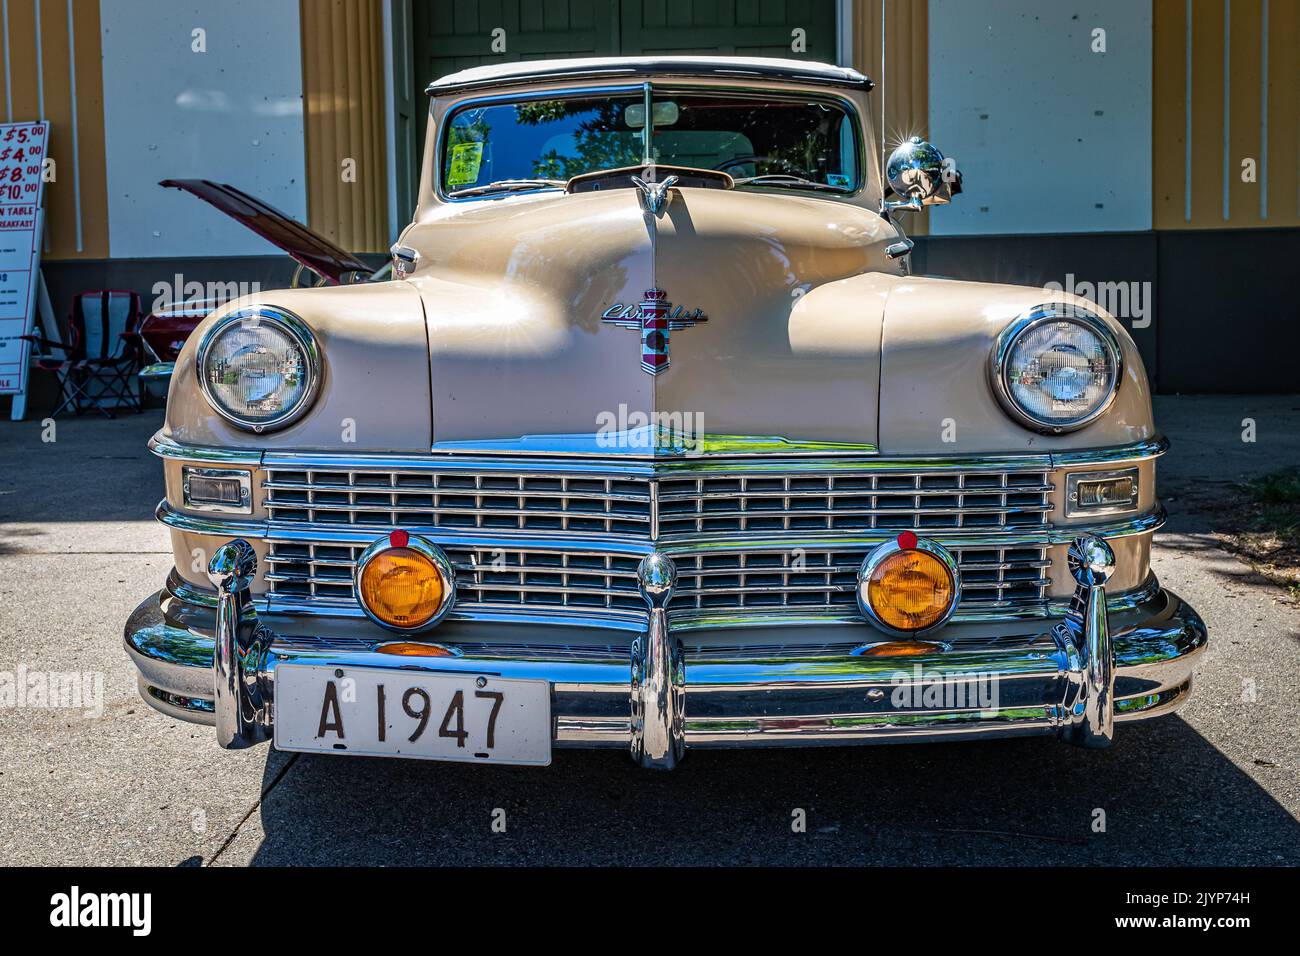 Falcon Heights, MN - June 17, 2022: Low perspective front view of a 1947 Chrysler New Yorker Highlander Convertible at a local car show. Stock Photo